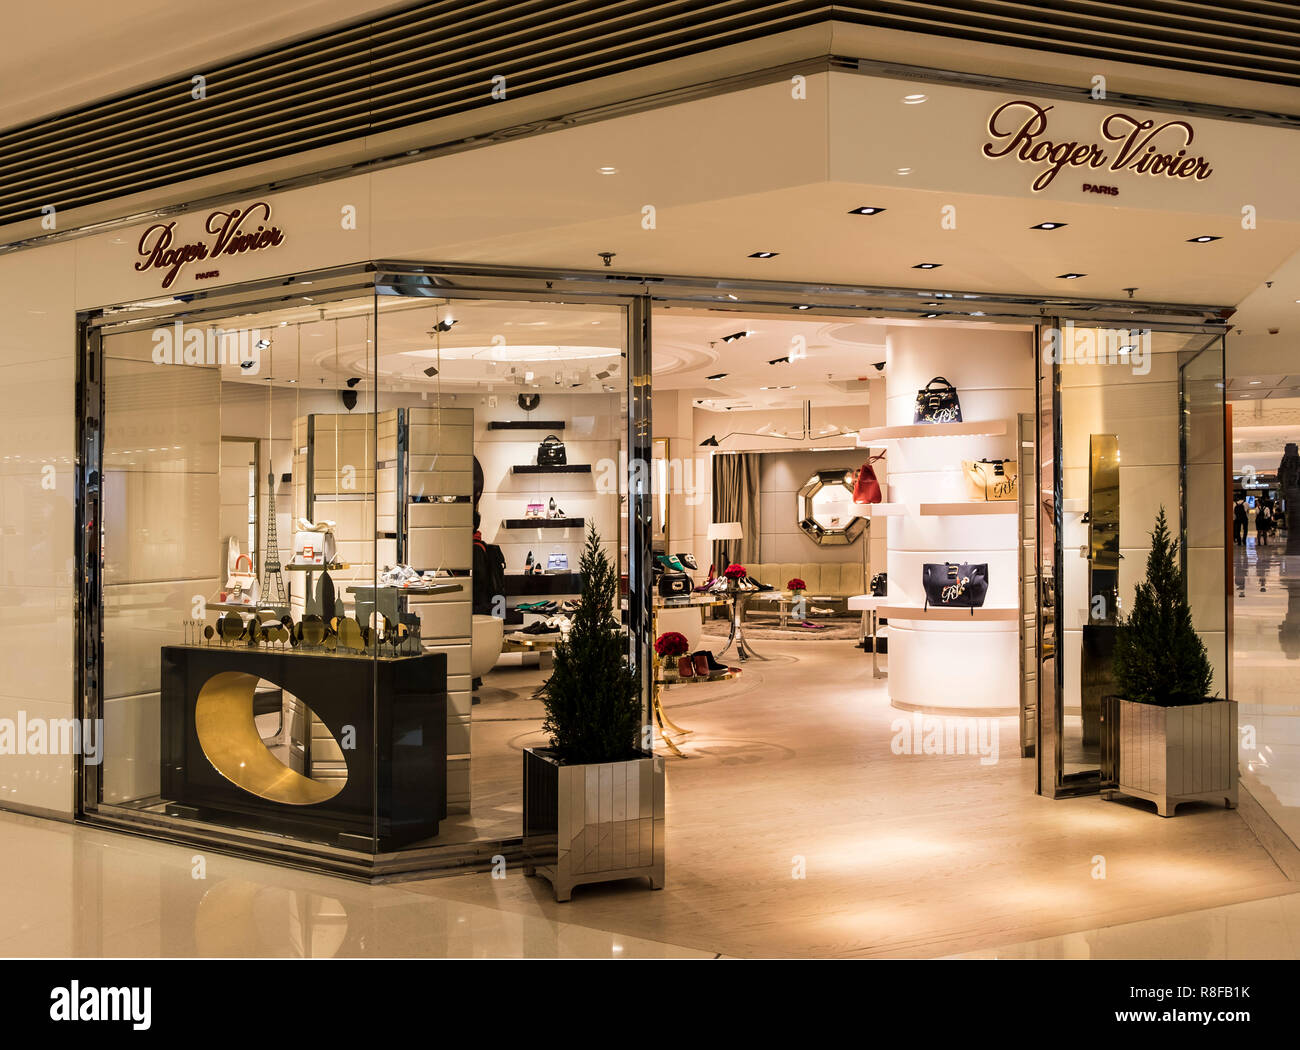 Roger vivier brand hi-res stock photography and images - Alamy